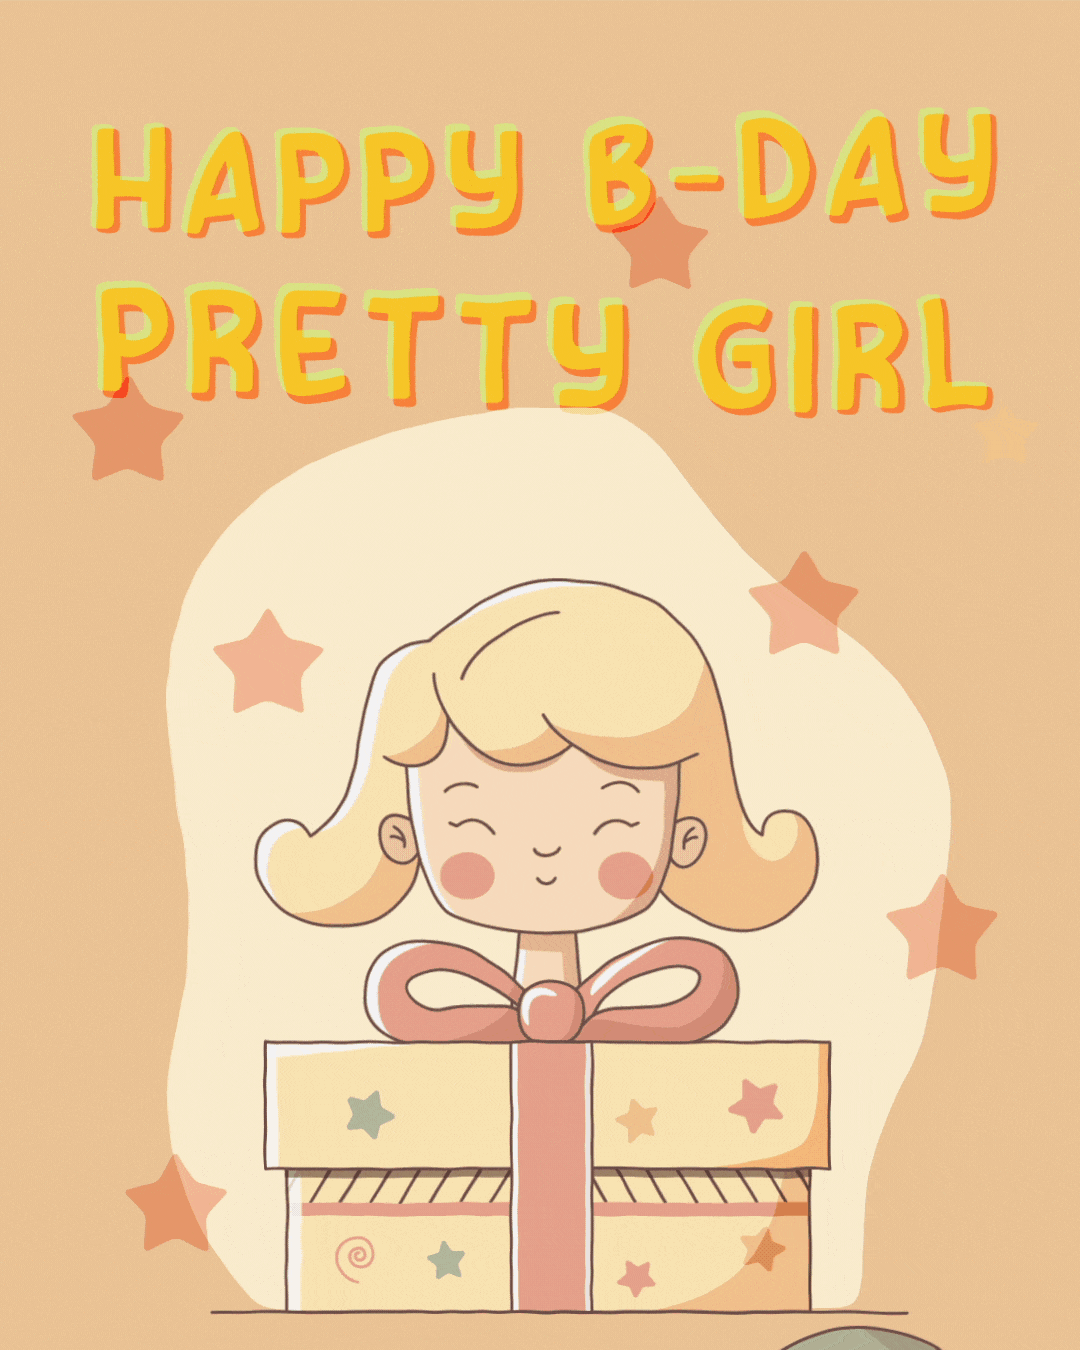 Free Happy Birthday Animated Images and GIFs for girl ...